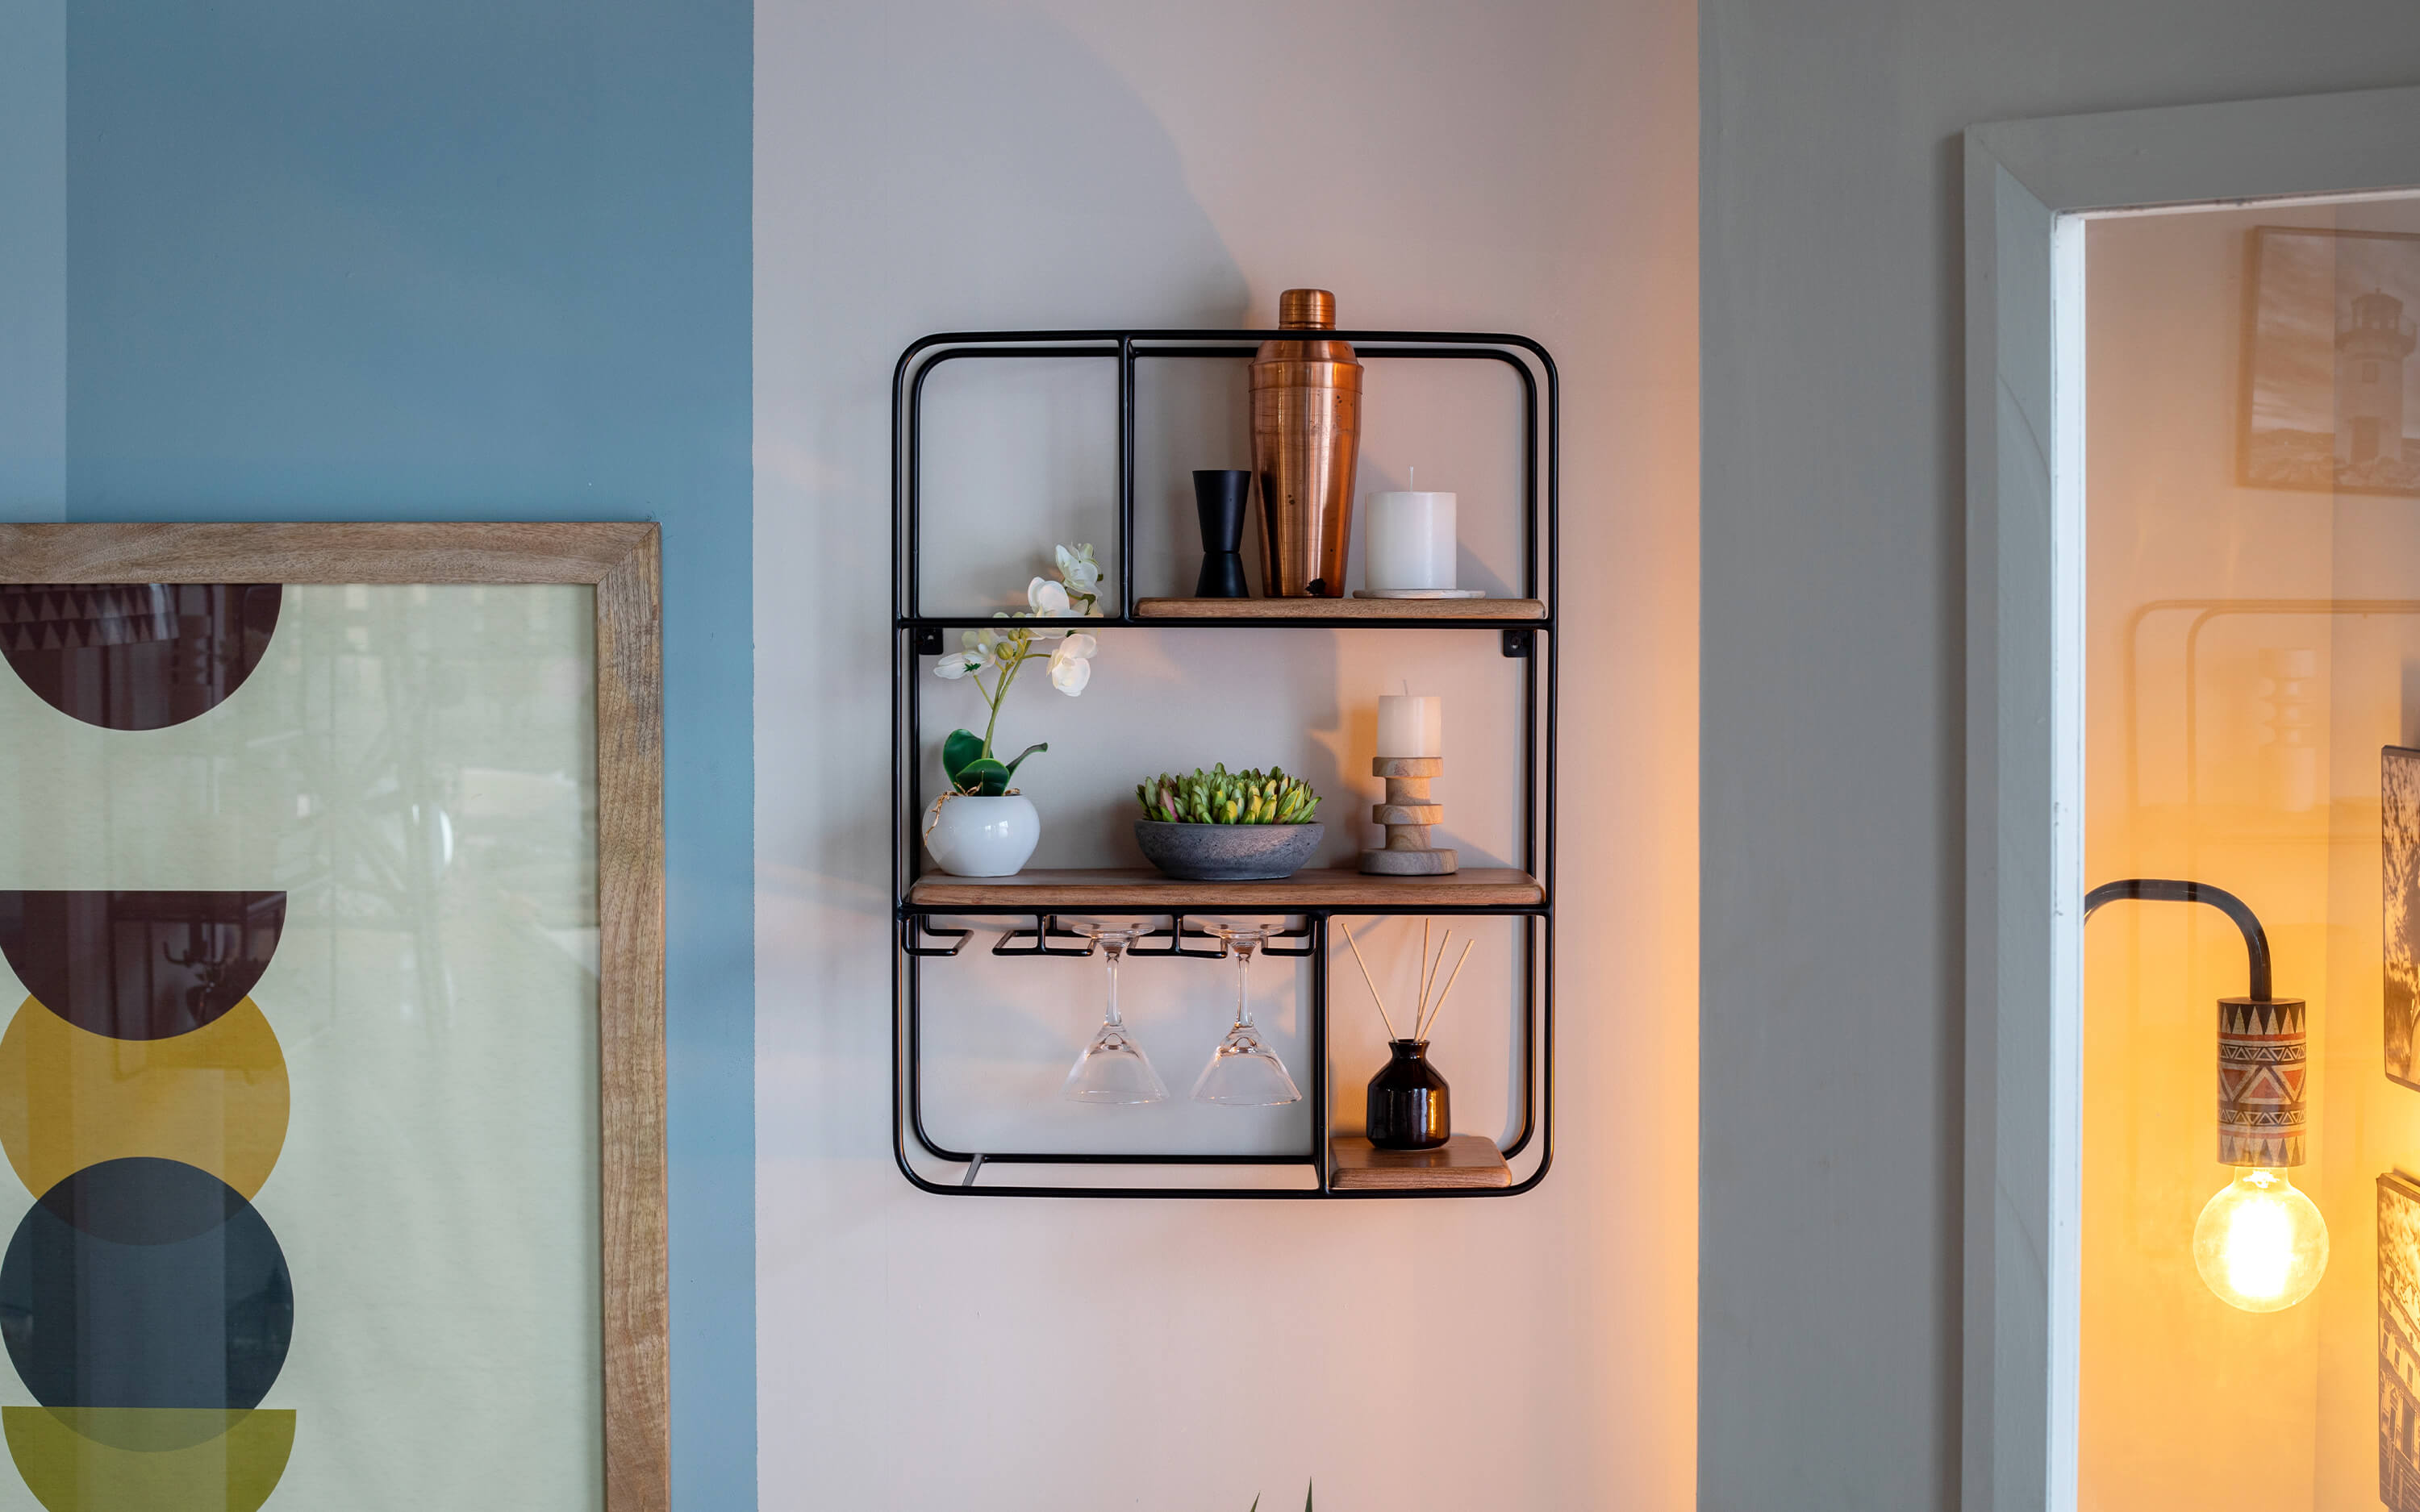 Contemporary home decor wooden shelf with metal framing on a light blue wall, enhancing the space with minimalist style.